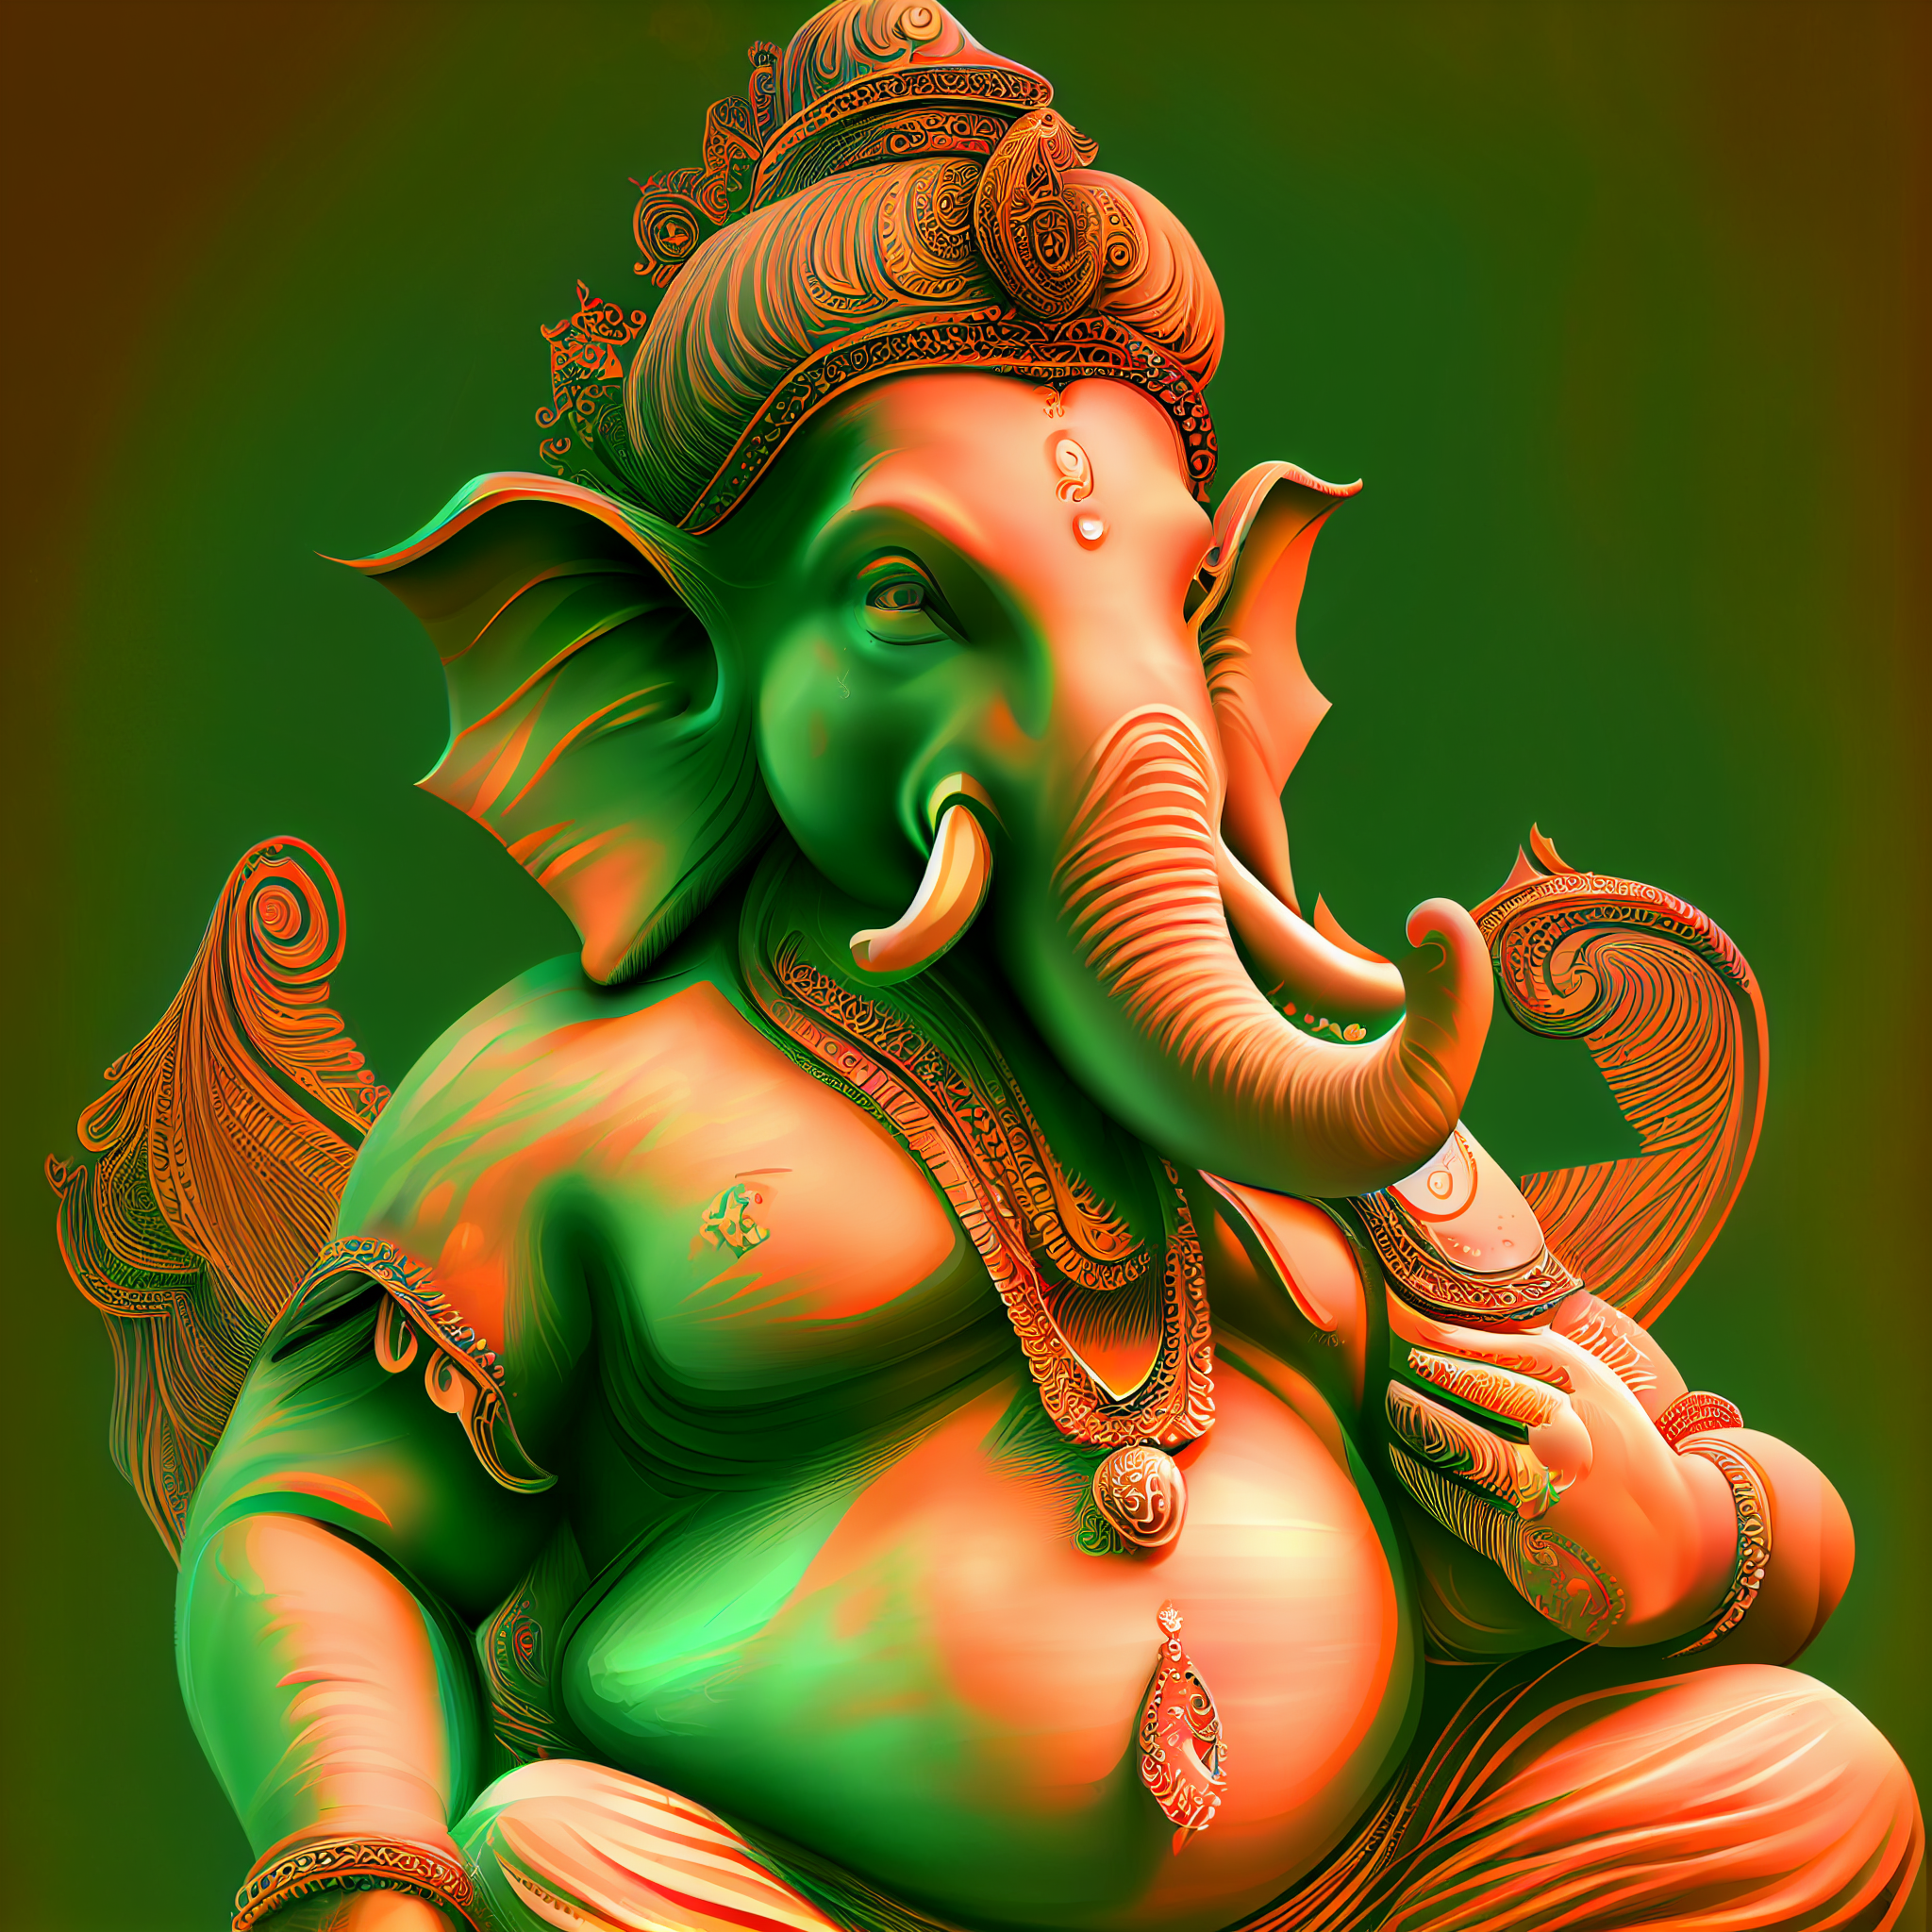 Radiant Blessings: Airbrush Art Print of Hindu Lord Ganesh in Pastel Orange on Light Green Background with Backlighting